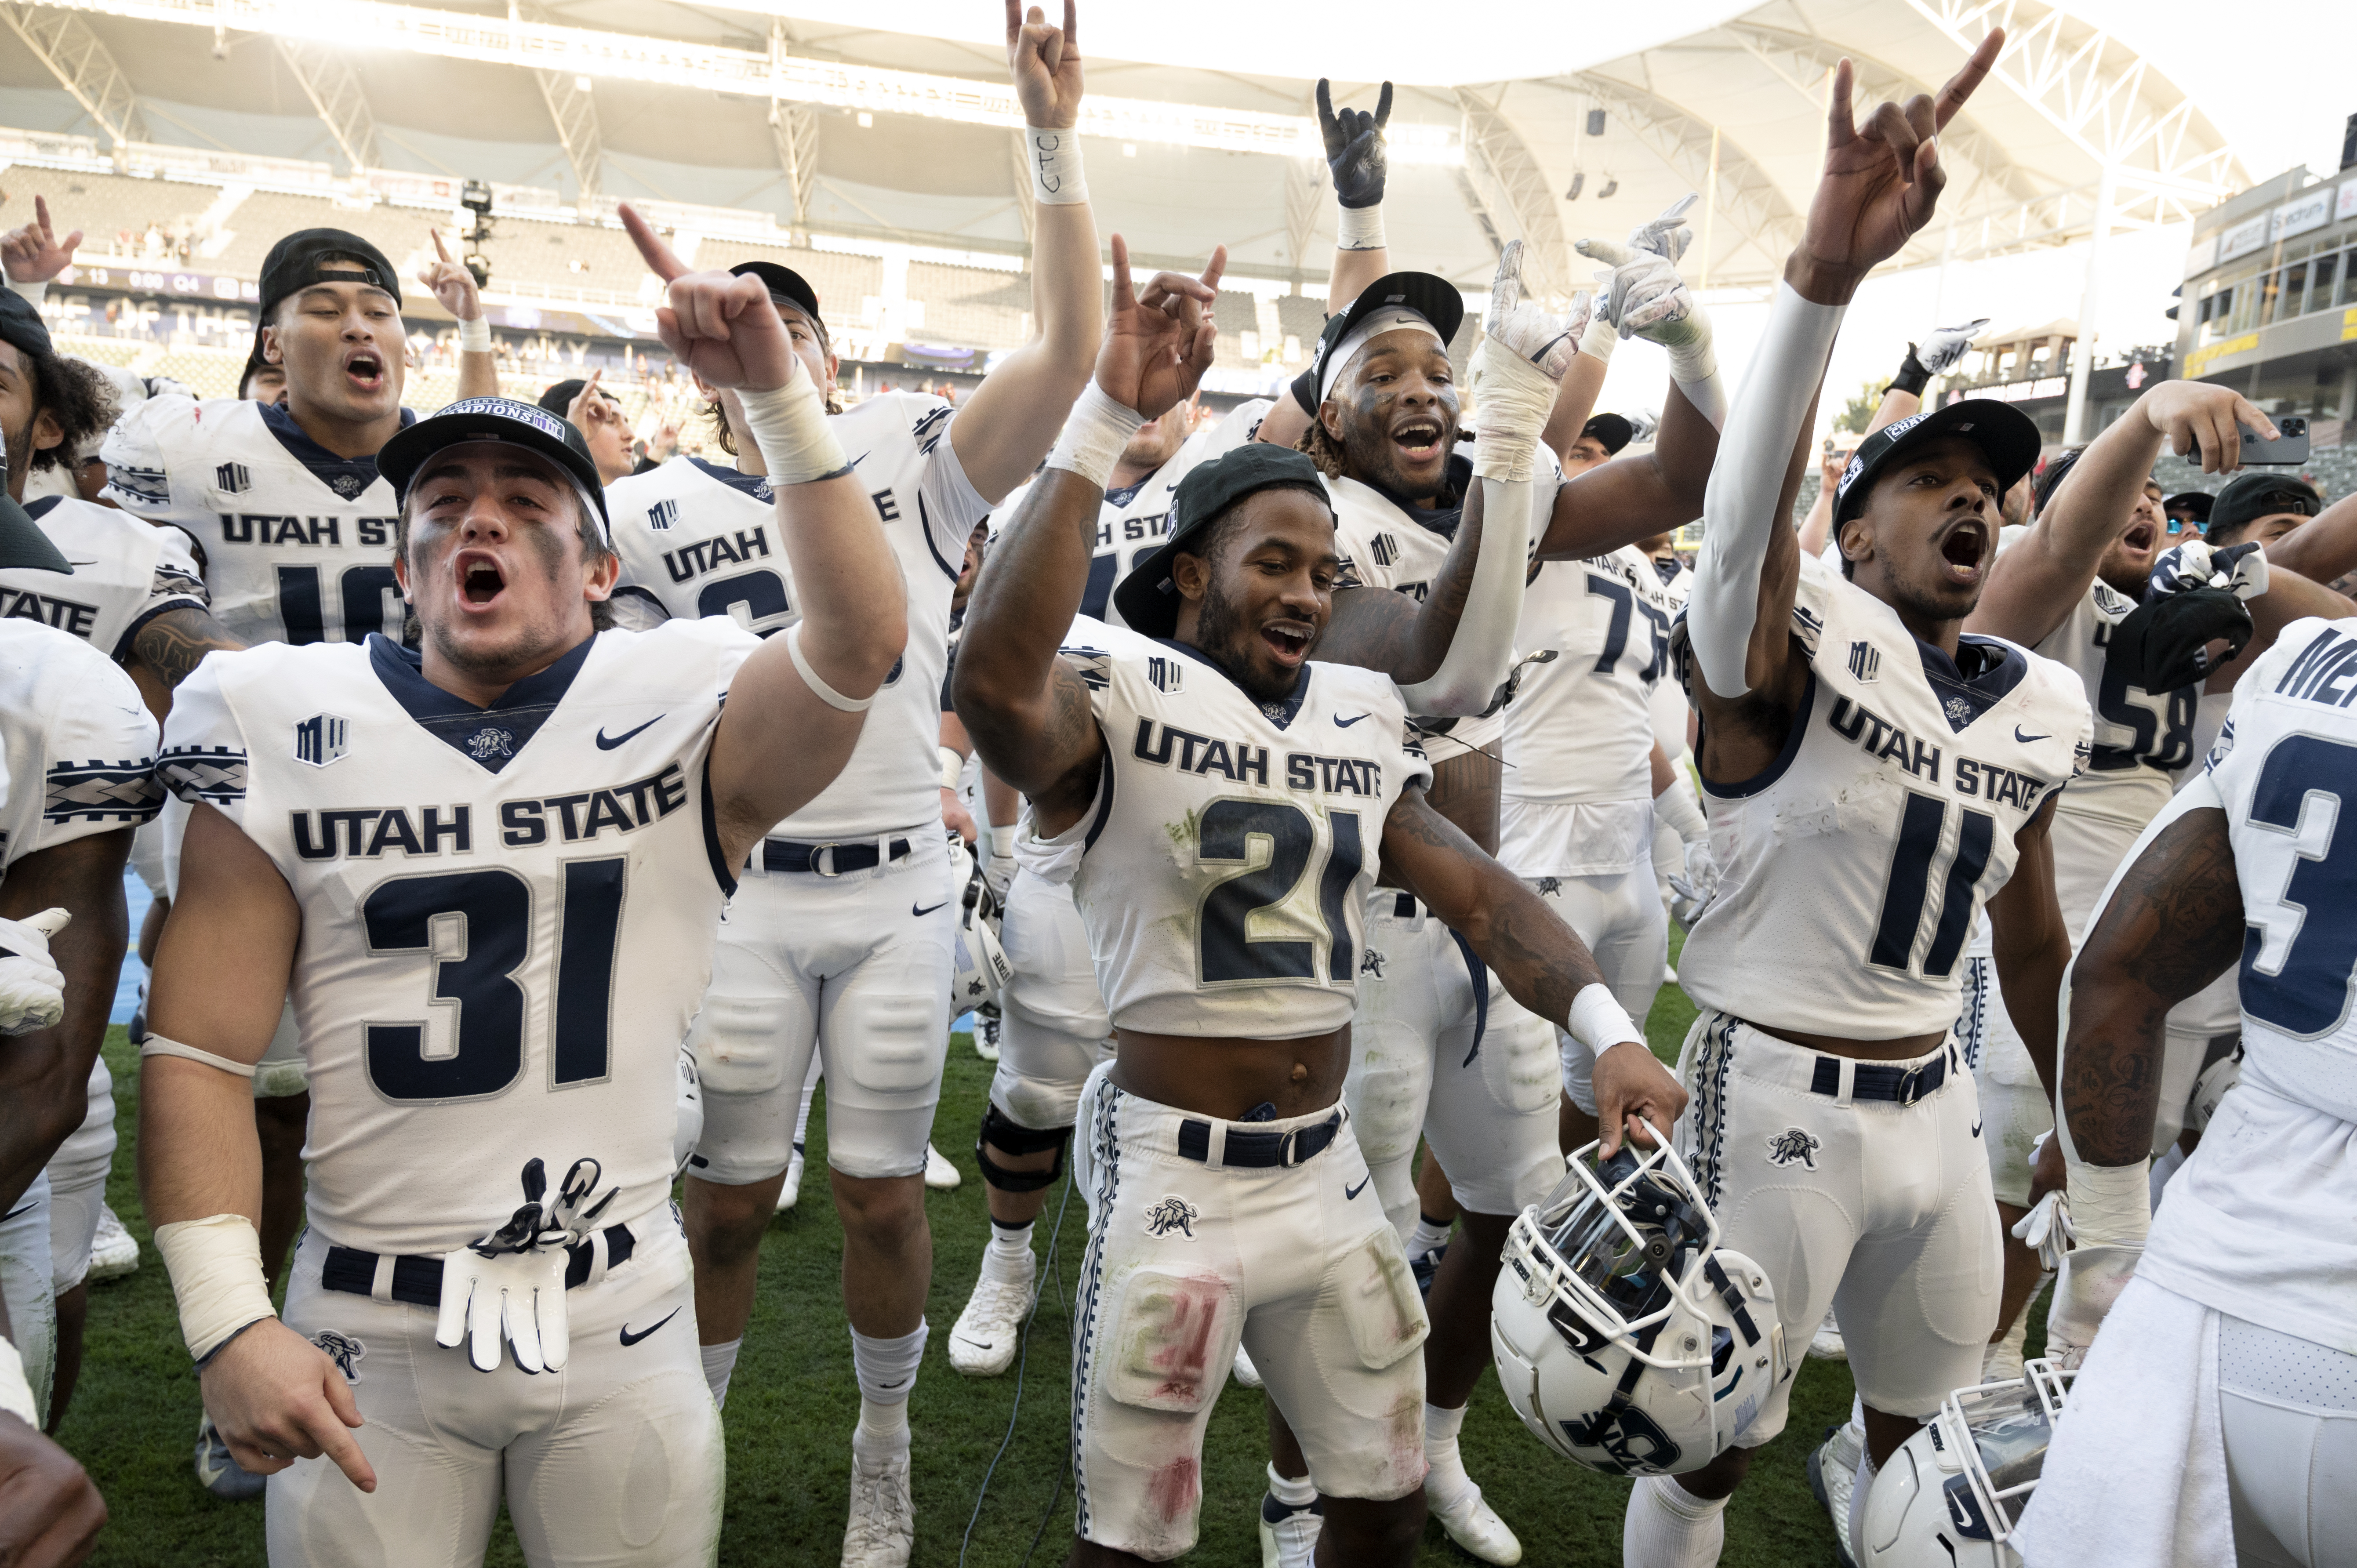 Utah State players celebrate after defeating San Diego State in the Mountain West Conference championship game.